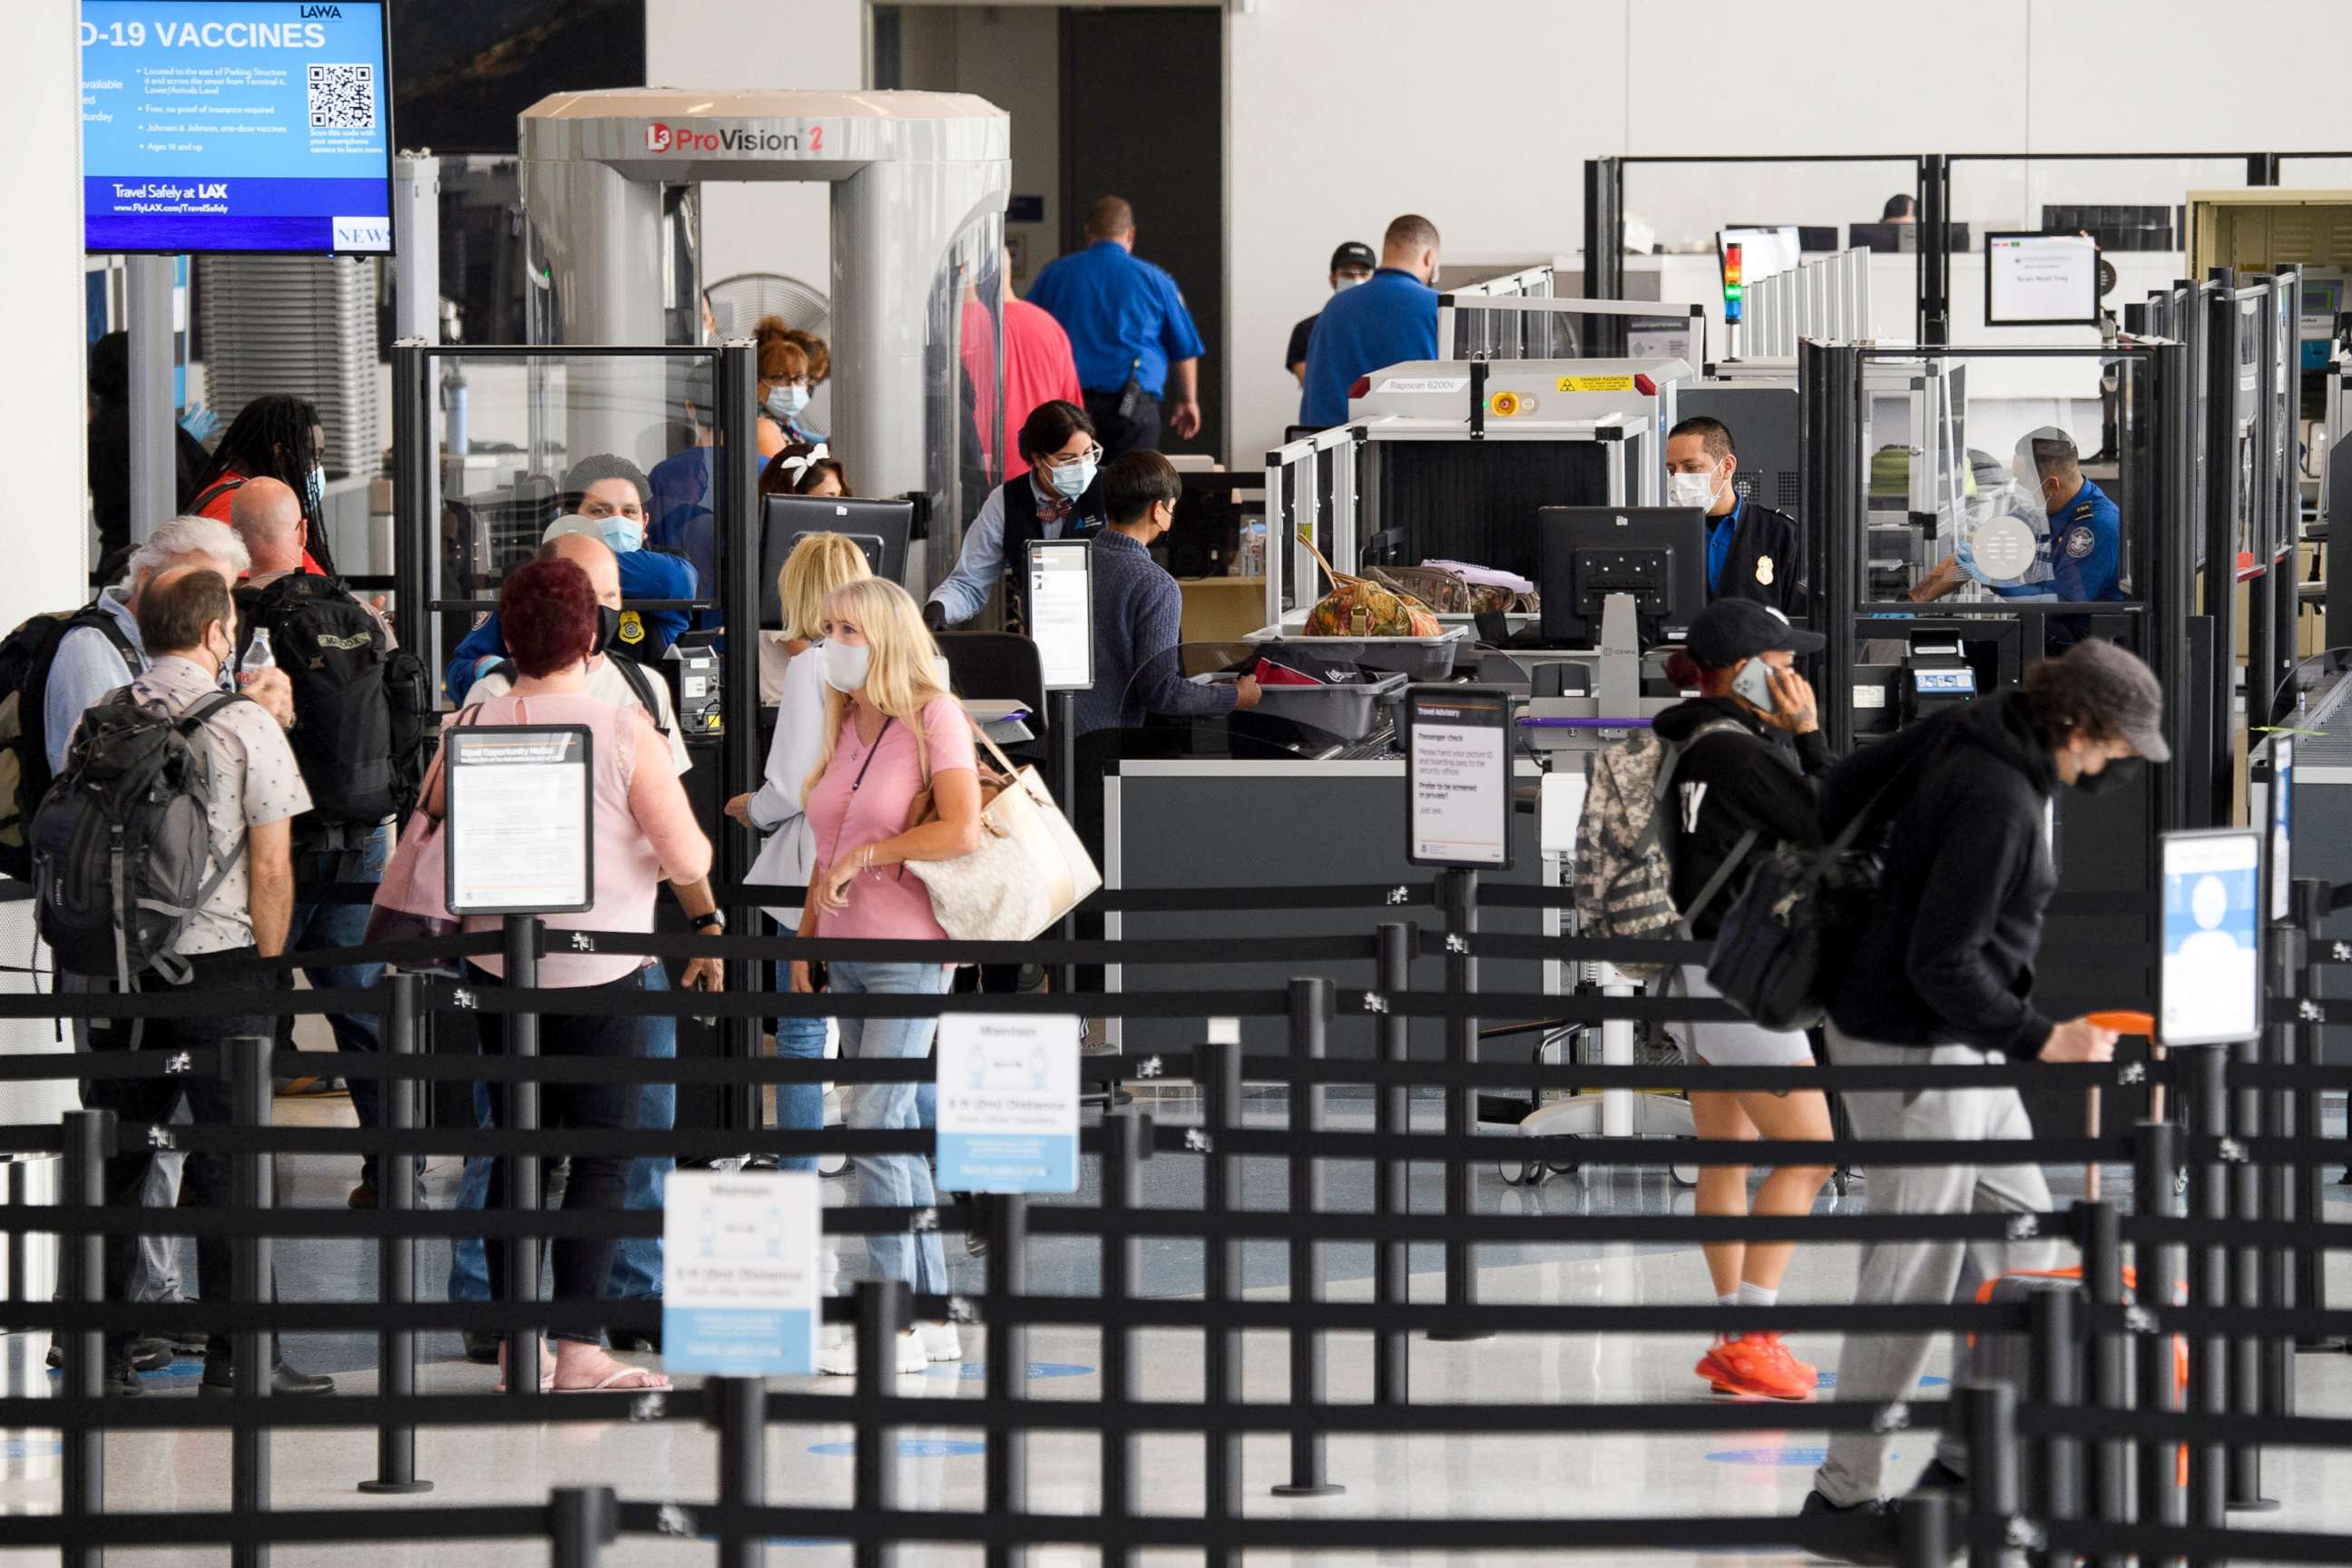 PHOTO: Travelers enter a new Transportation Security Administration (TSA) screening area during the opening of the Terminal 1 expansion at Los Angeles International Airport, June 4, 2021.